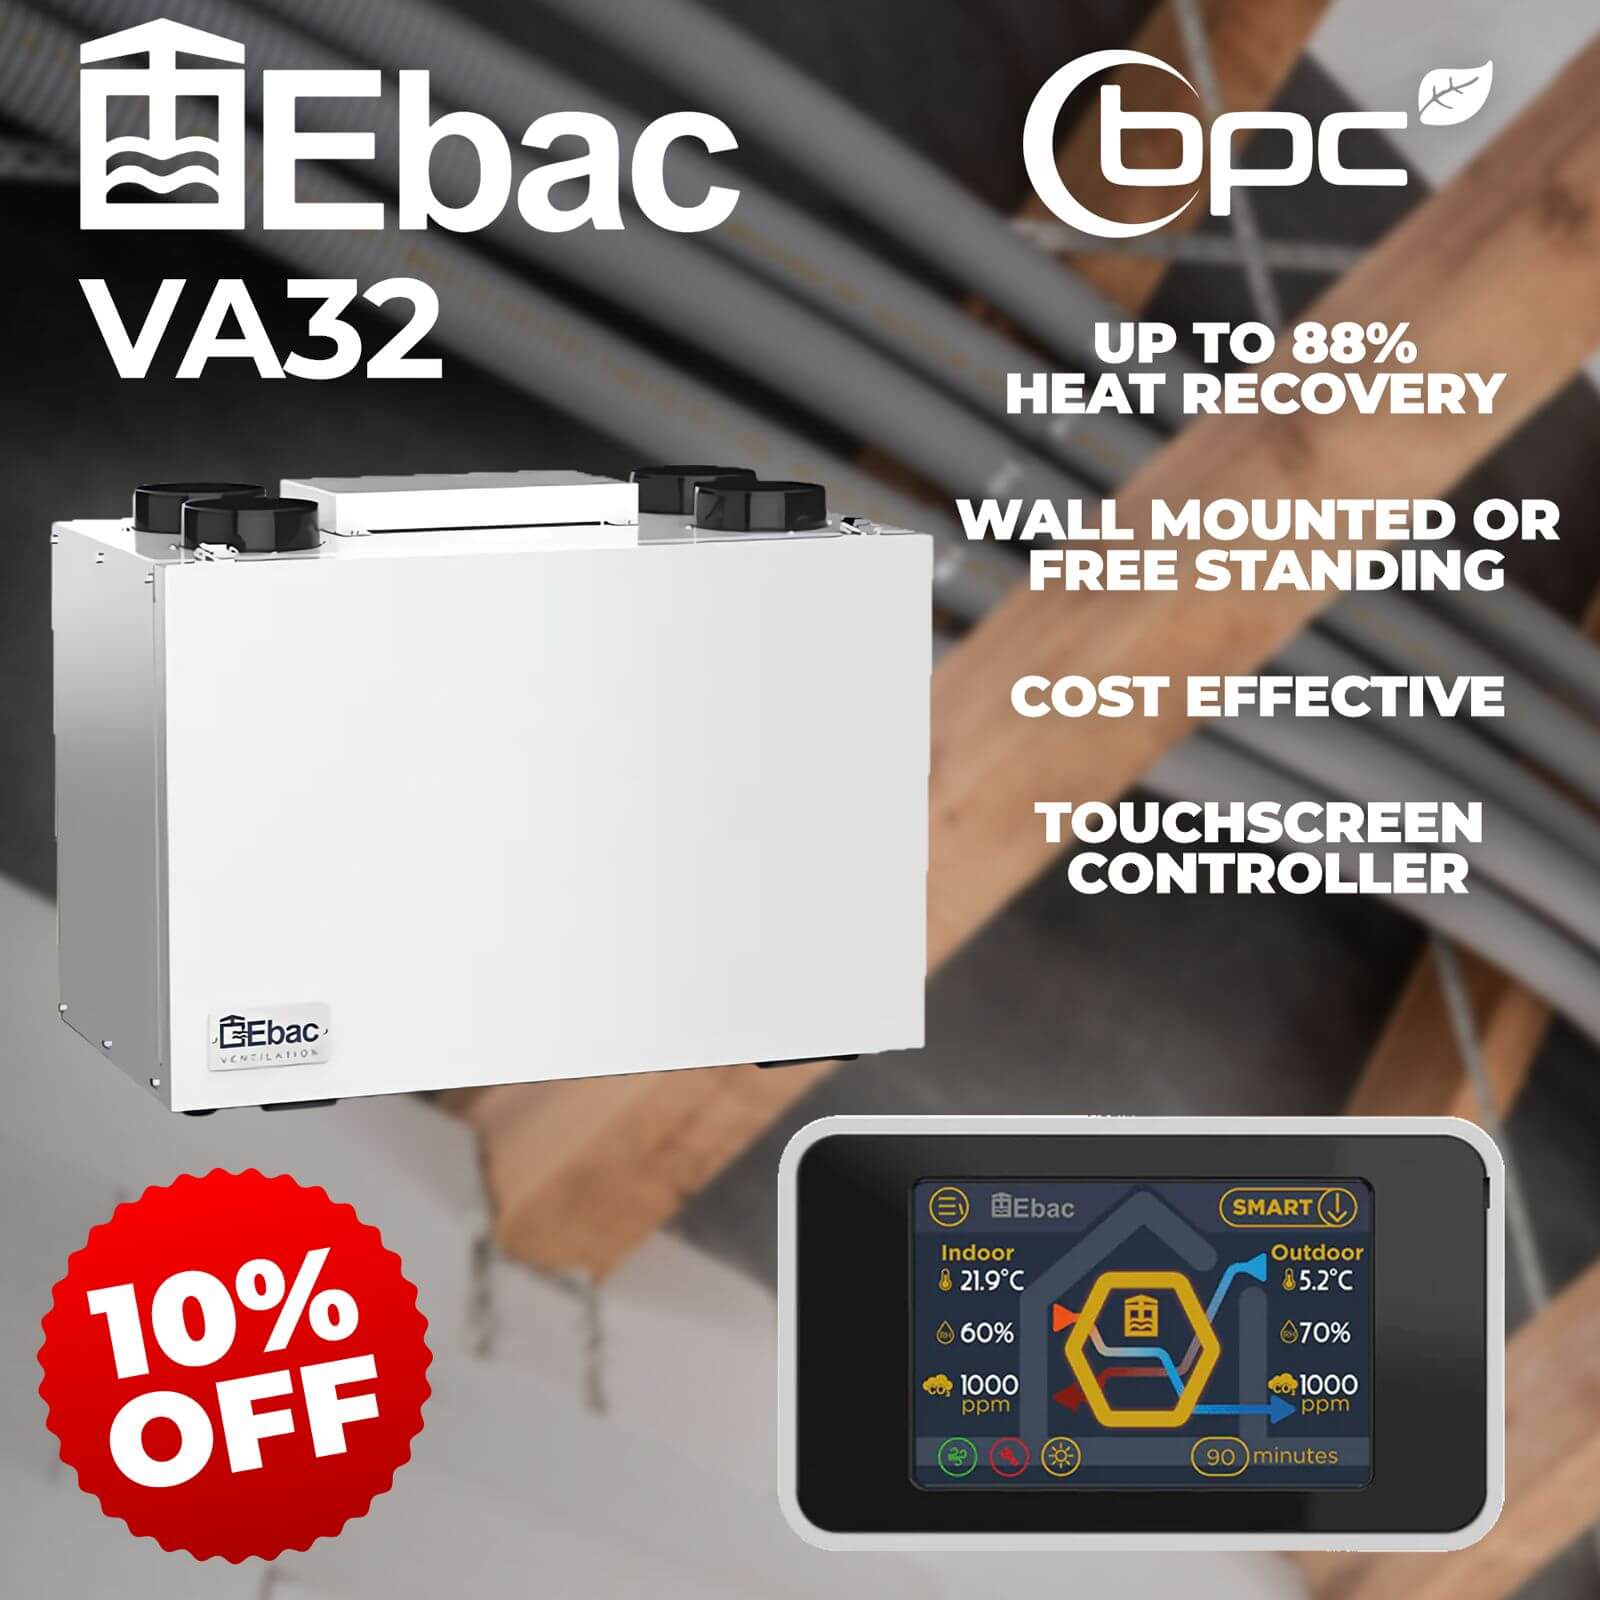 Discover More About The Ebac VA32